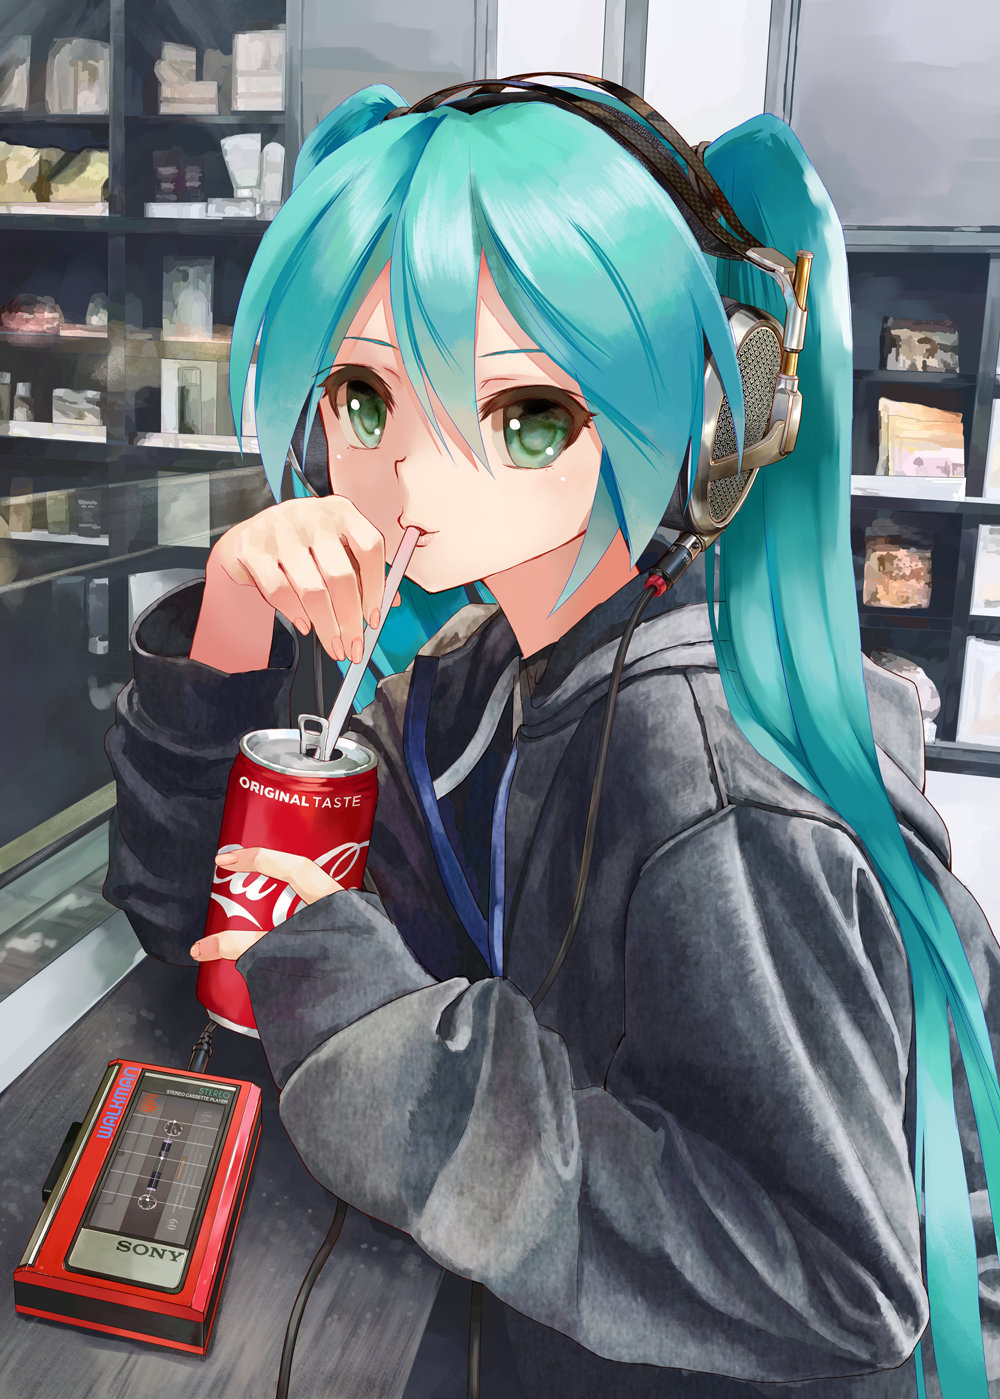 1girl aqua_hair black_jacket cafe can cassette_player coca-cola commentary_request counter drinking drinking_straw green_eyes hair_between_eyes hatsune_miku headphones highres hood hood_down hooded_jacket jacket listening_to_music long_hair long_sleeves looking_at_viewer shelf soda_can solo sony takepon1123 twintails upper_body vocaloid walkman